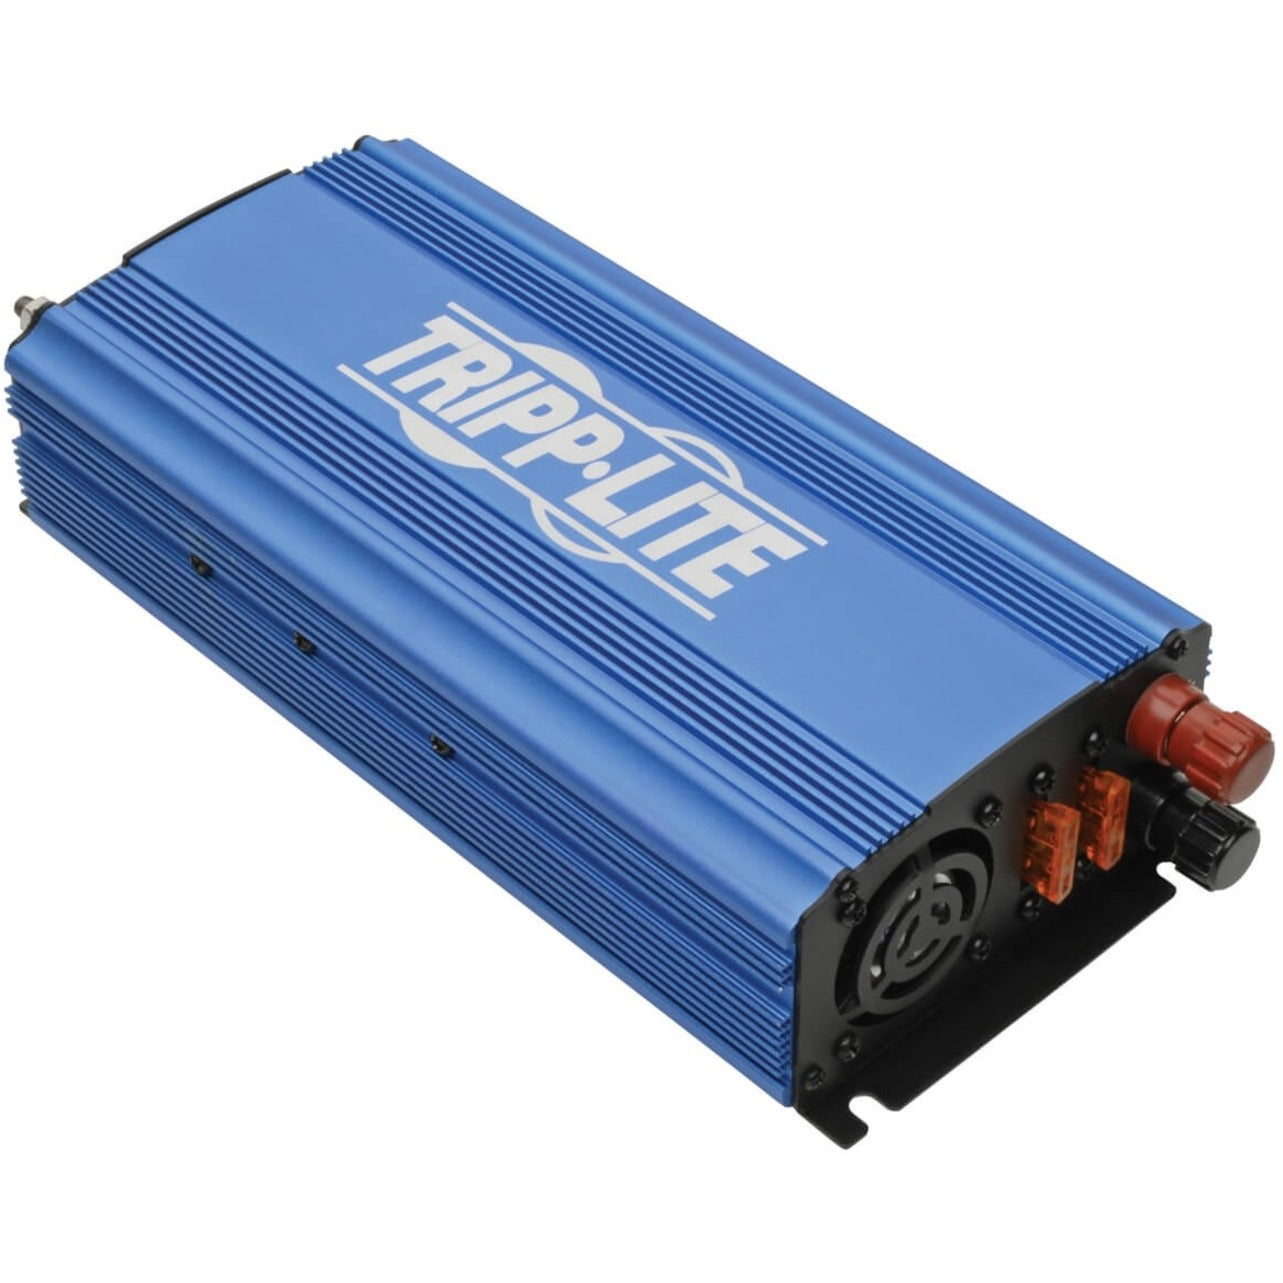 Tripp Lite 750W Light-Duty Compact Power Inverter with 2 AC/1 USB 2.0A/Battery Cables Mobile